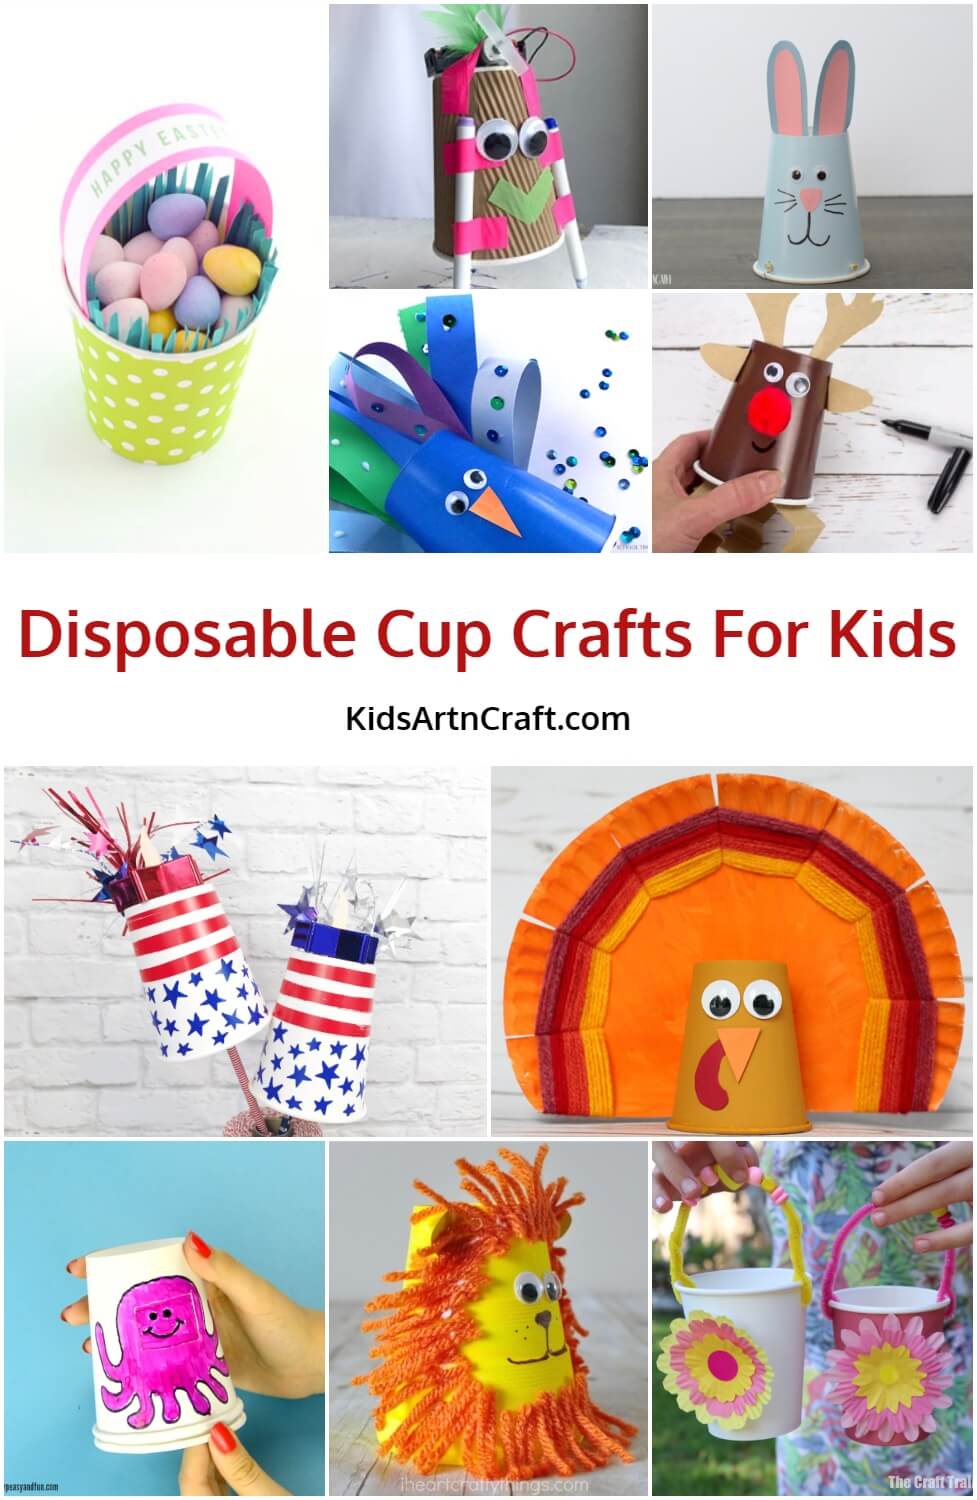 Disposable Cup Crafts For Kids - Kids Art & Craft